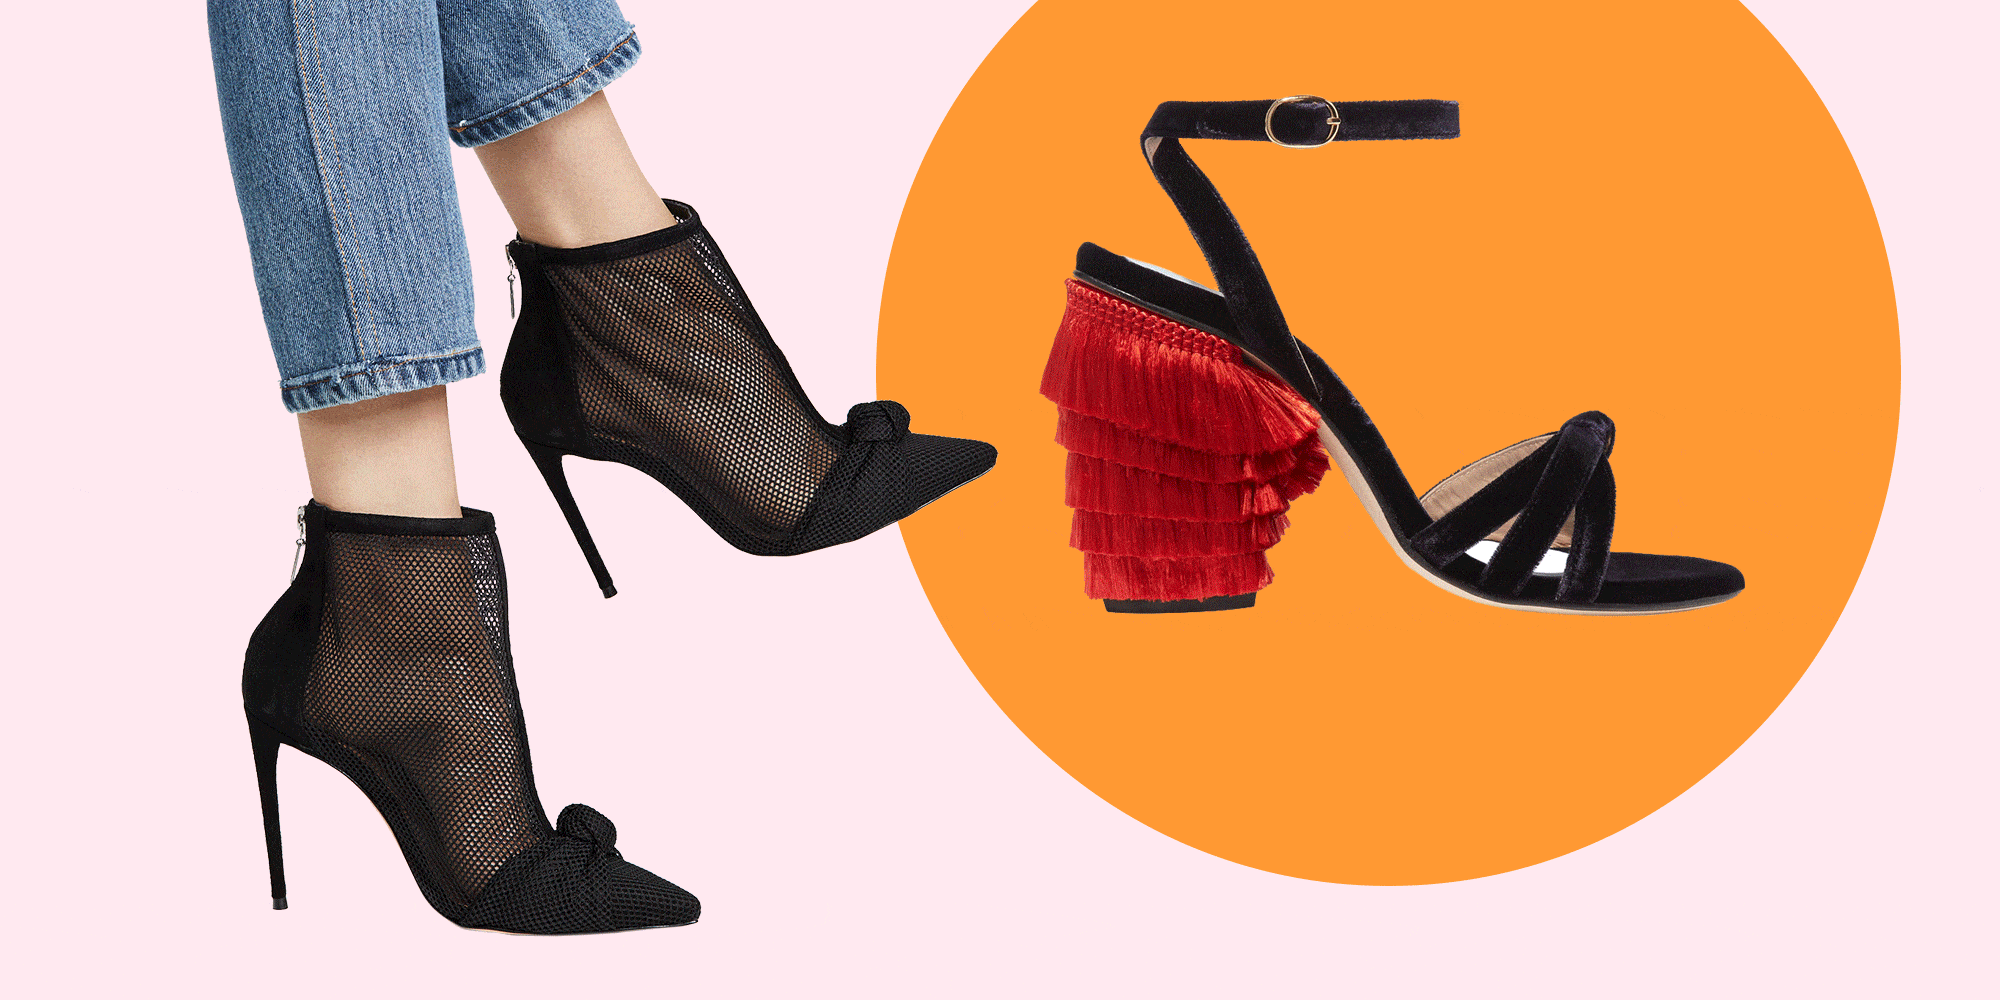 spring shoe styles 2019